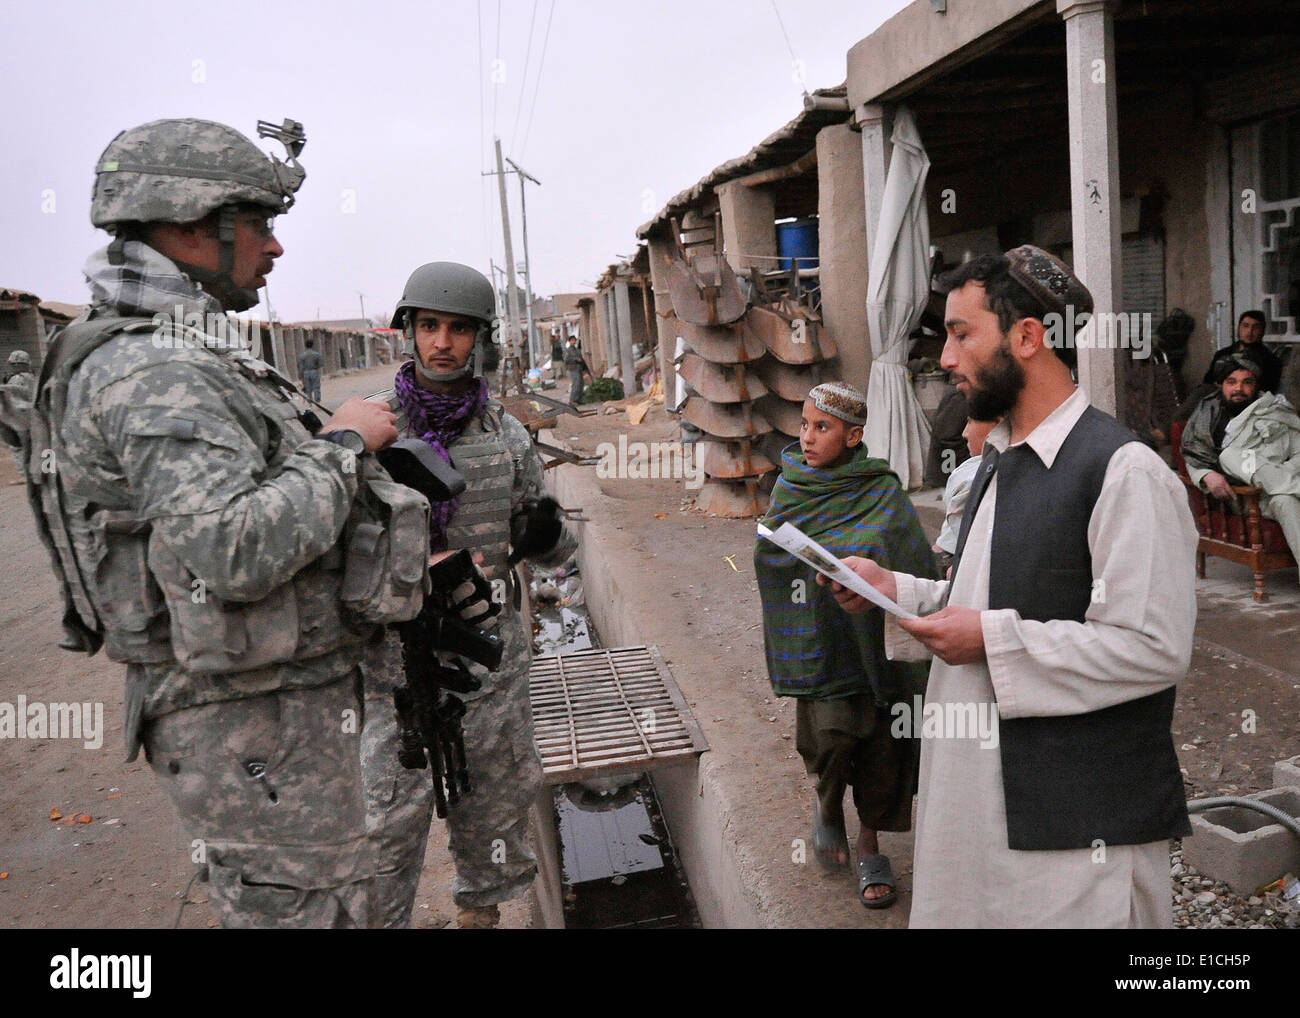 U.S. Army 1st Lt. Morgan Boyd, with 8th Squadron, 1st Cavalry Regiment, meets with shop owners in a bazaar in Hutal, Afghanista Stock Photo